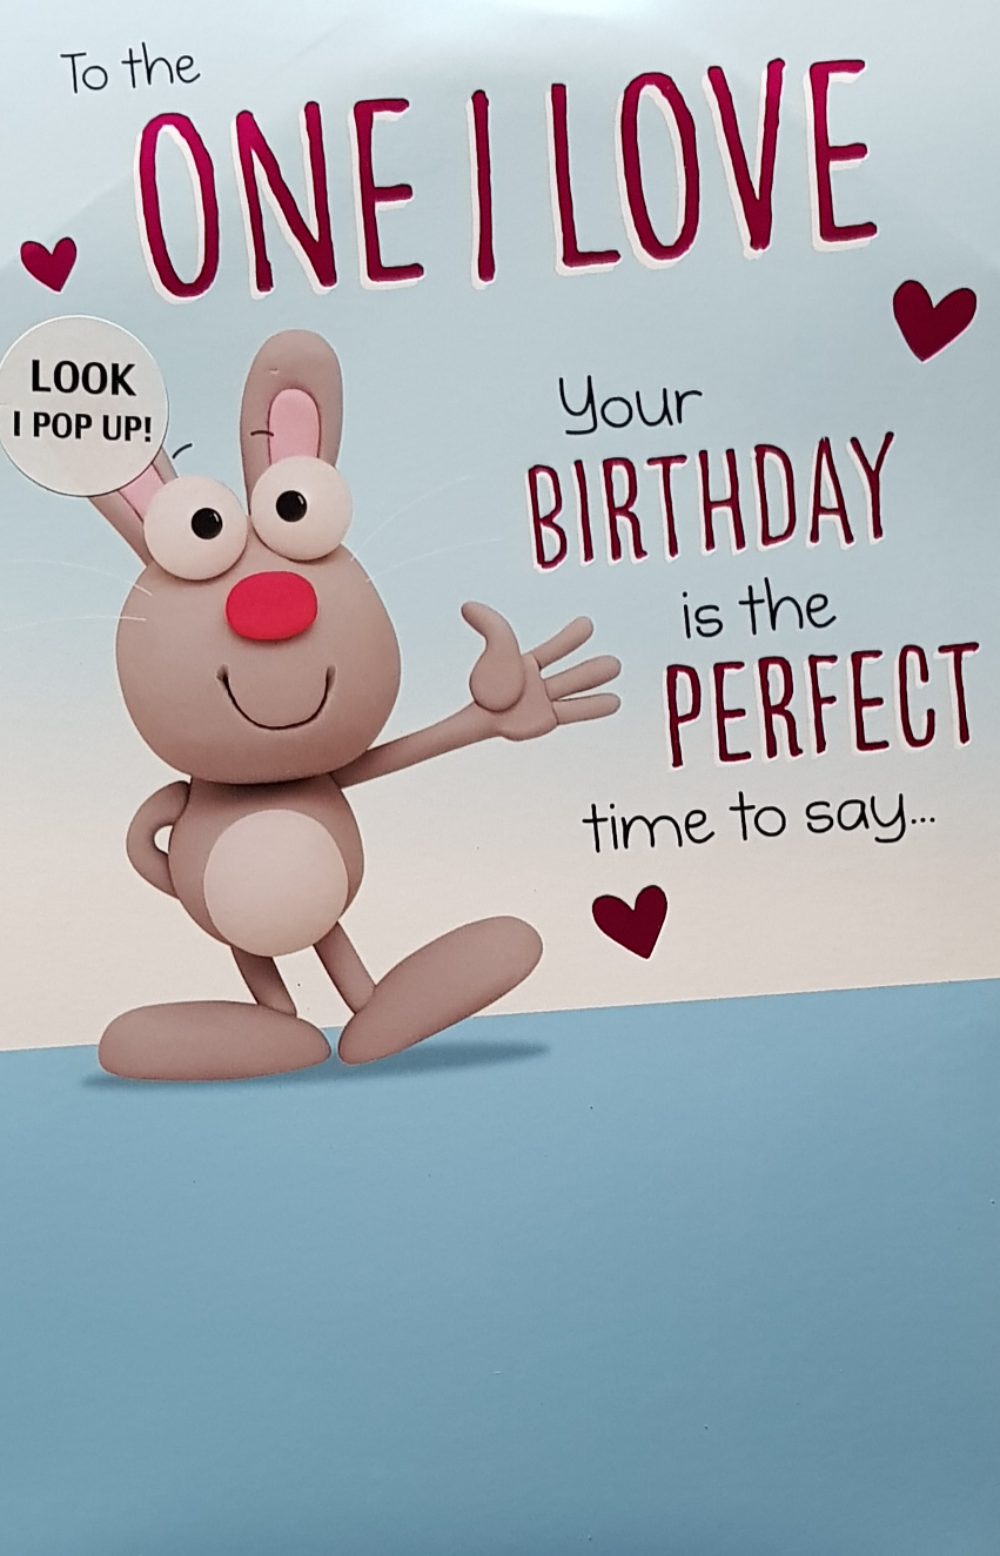 Birthday Card - One I Love / Your Birthday Is The Perfect Time To Say...( Pop Up Card )